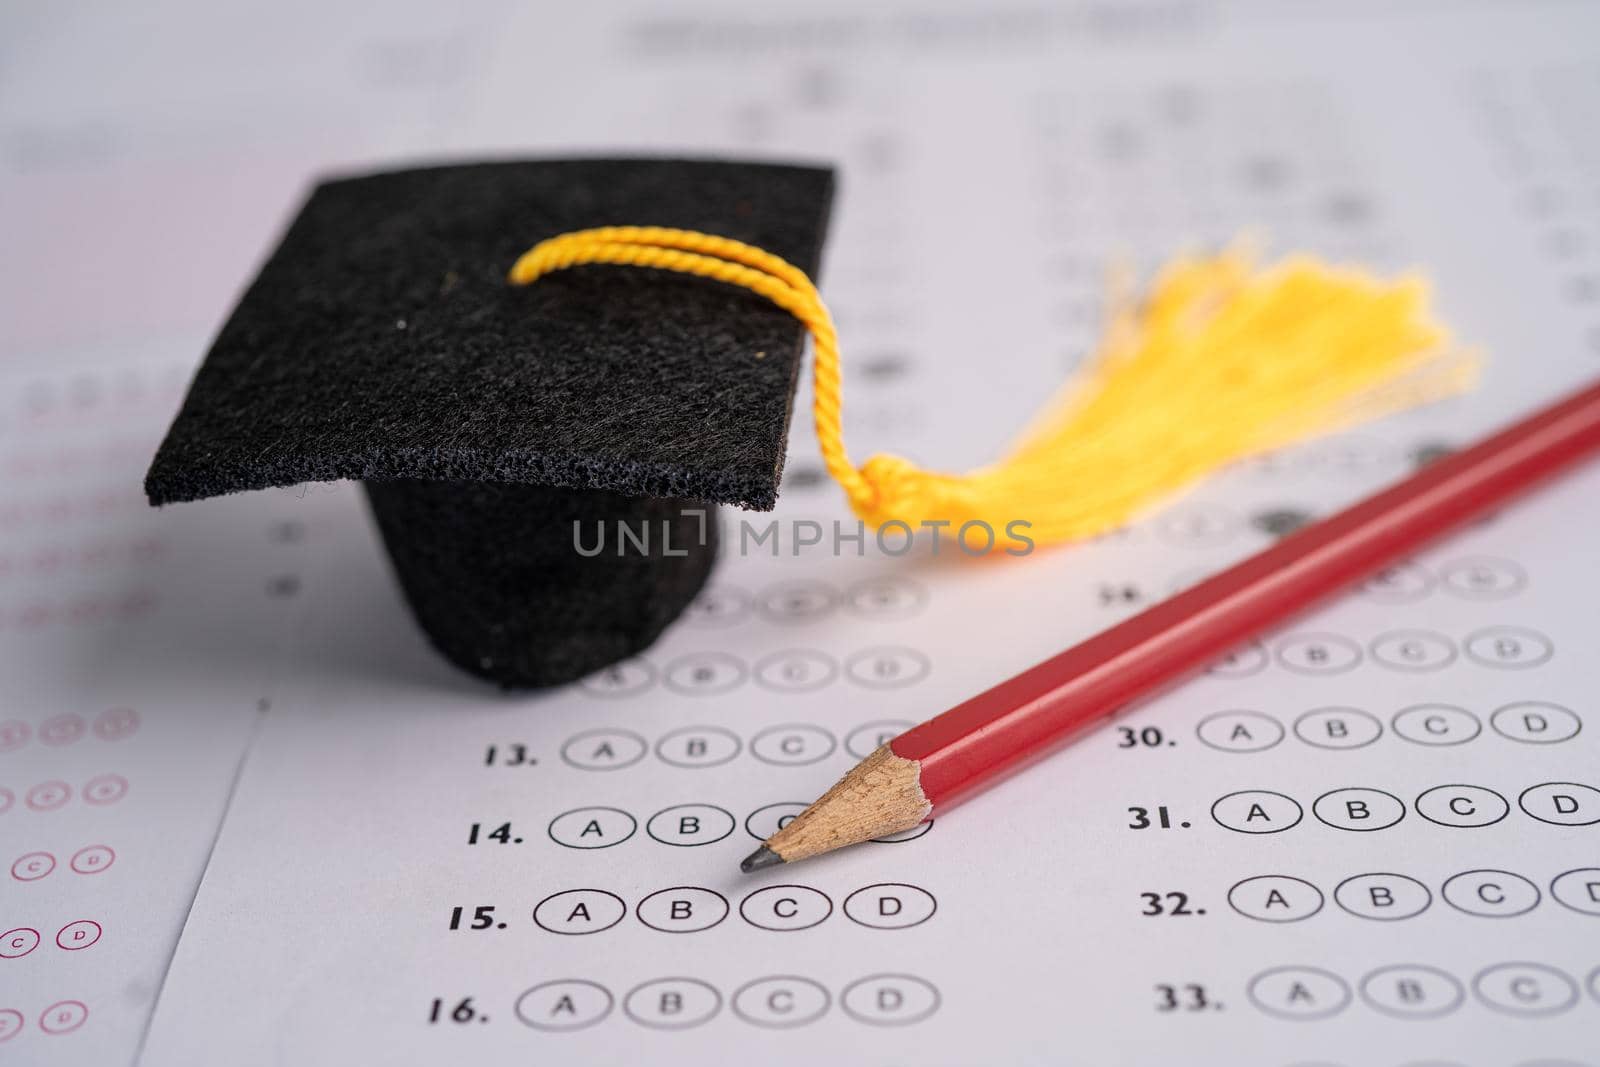 Graduation gap hat and pencil on answer sheet background, Education study testing learning teach concept. by pamai